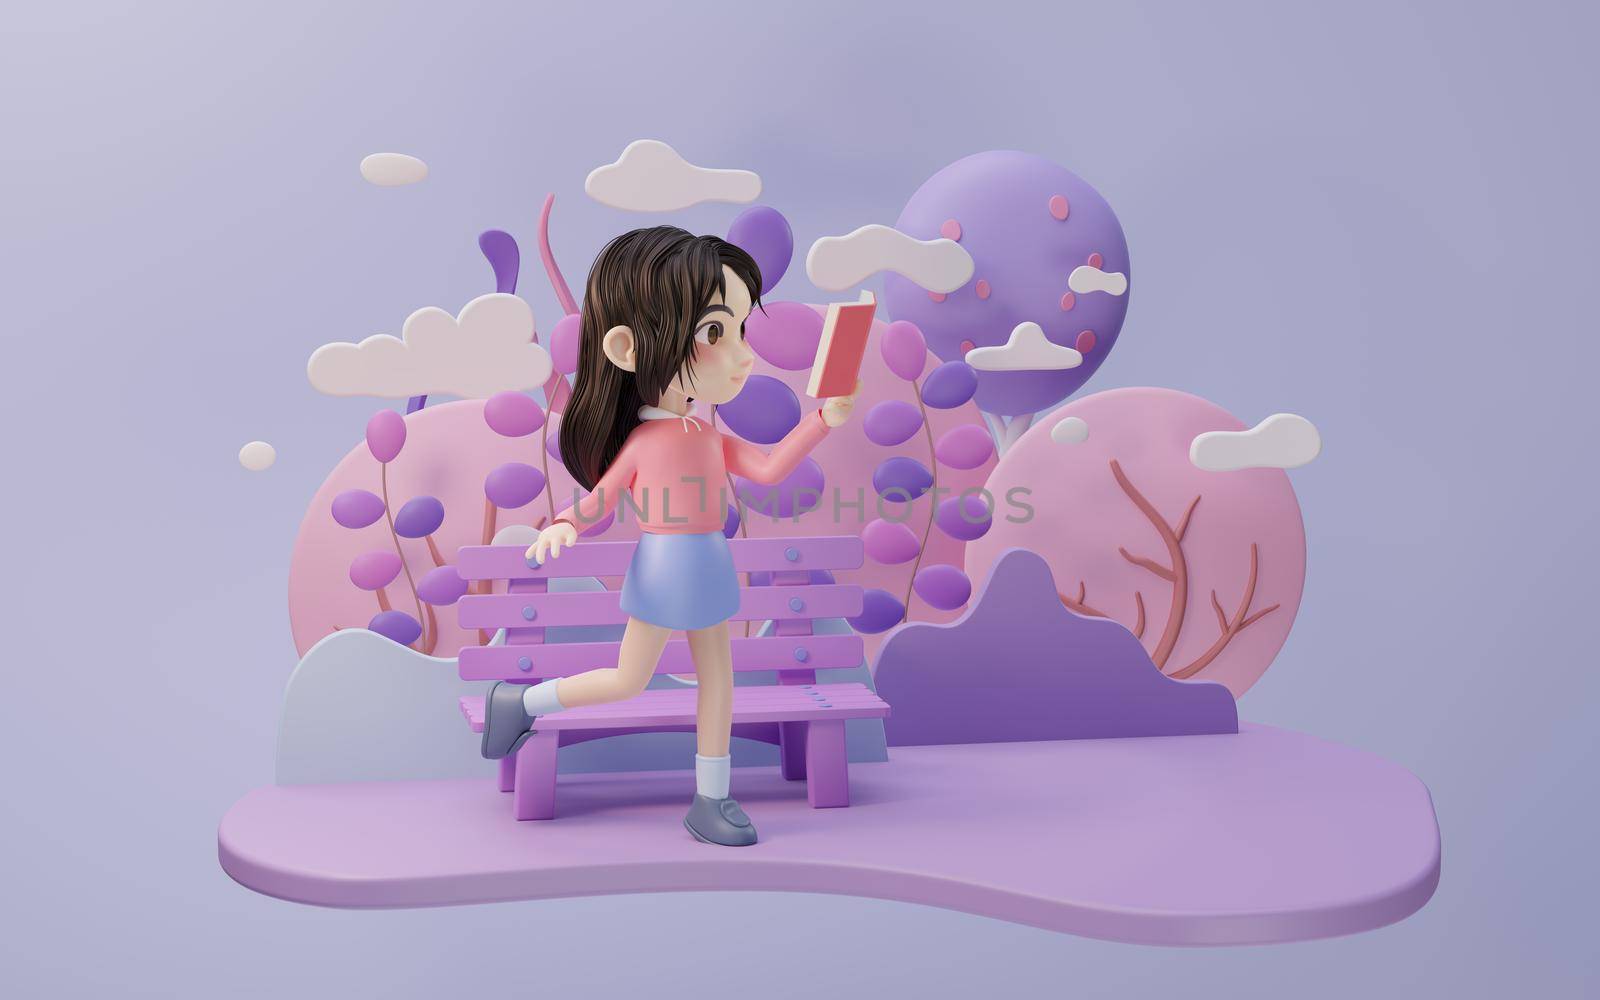 Little girl with cartoon style, 3d rendering. Computer digital drawing.